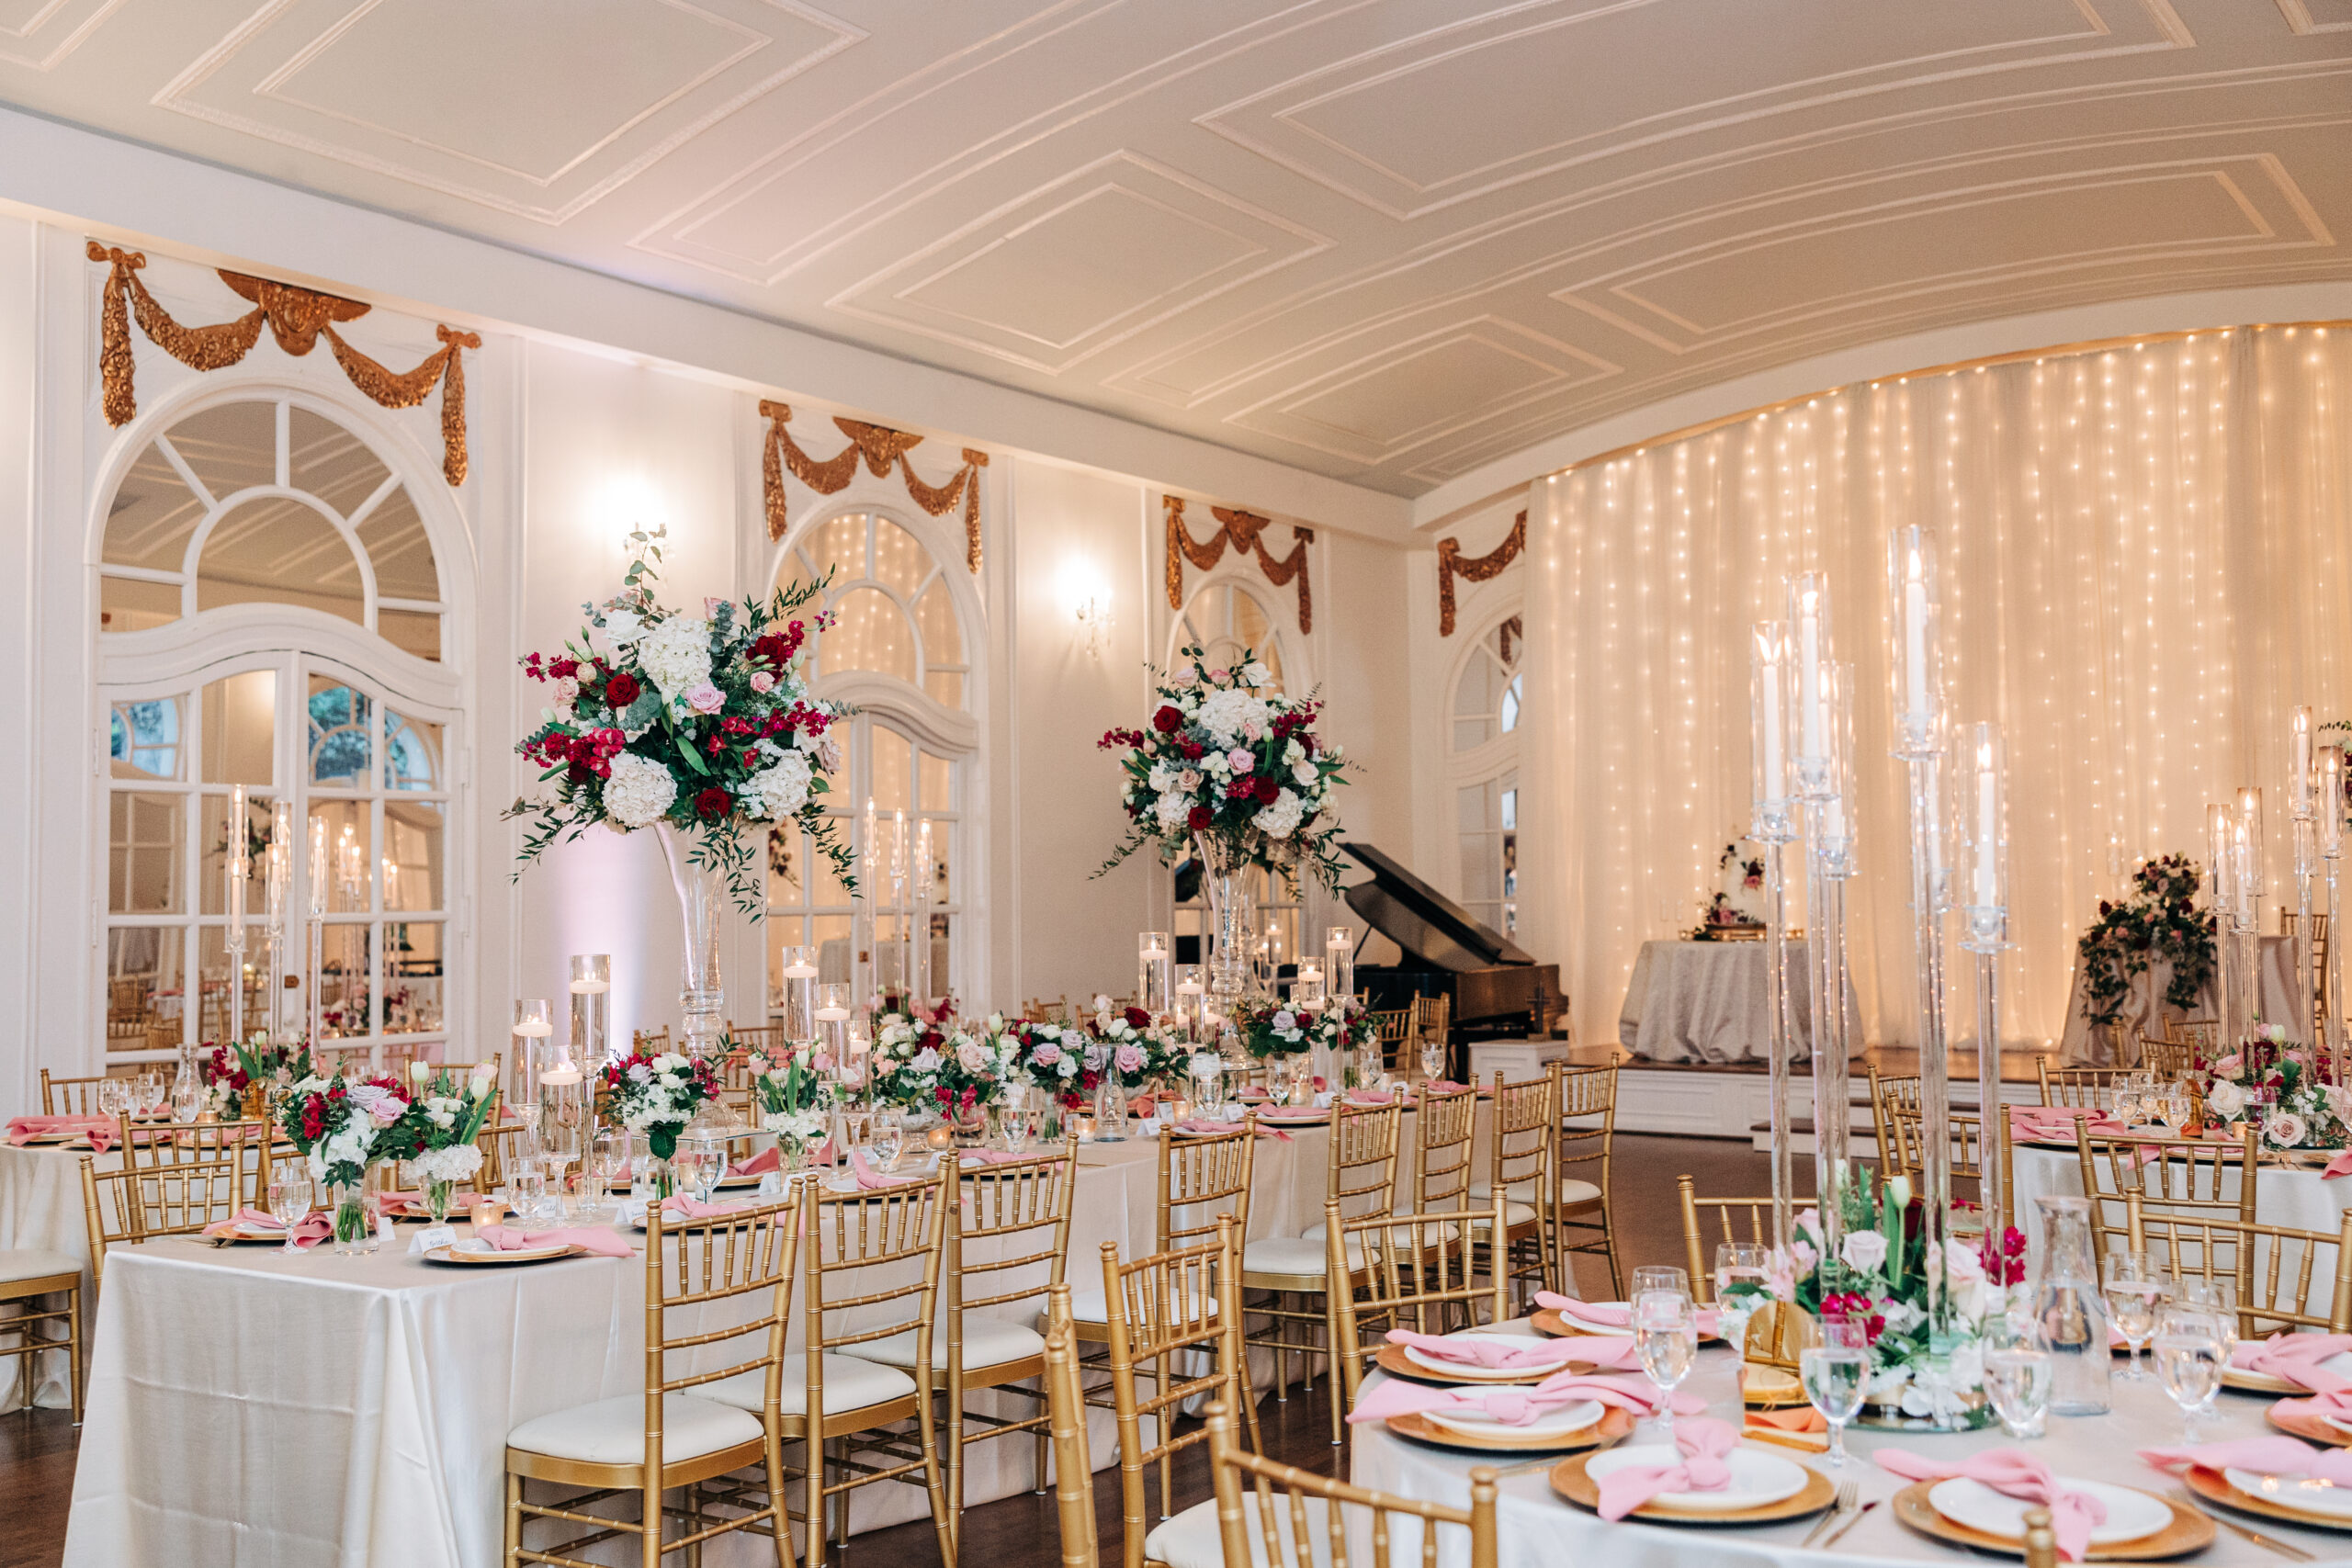 A Wimbish House wedding reception set up with large florals, pink napkins and gold chairs